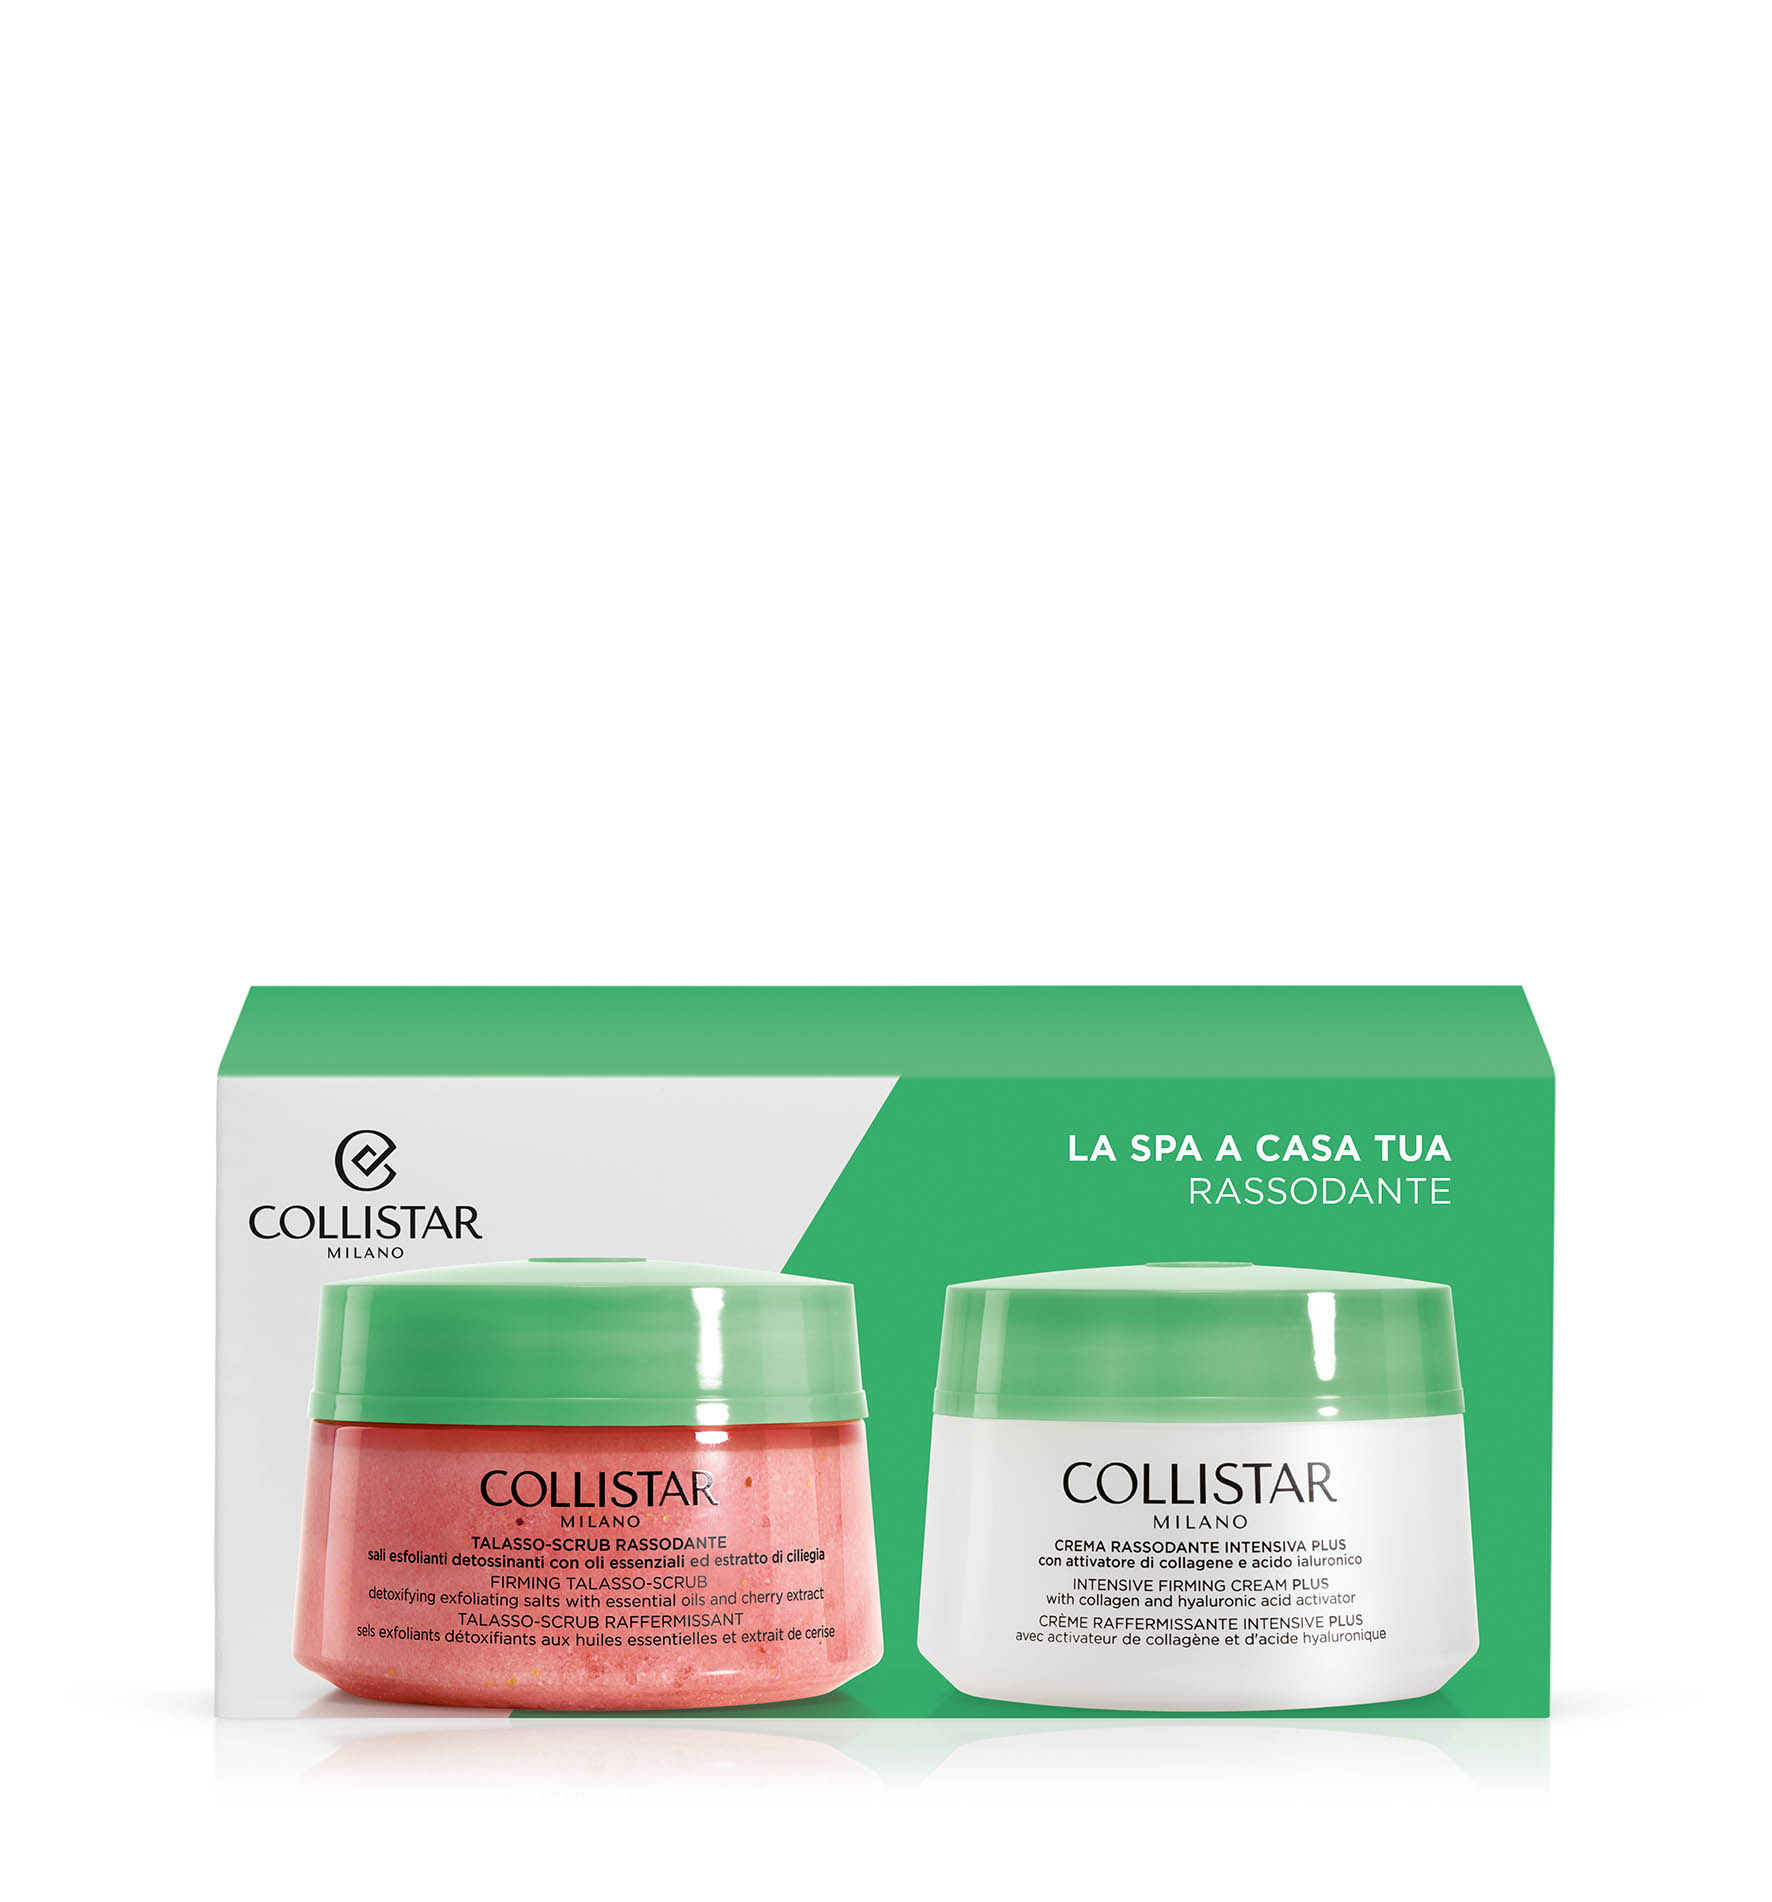 SET SPA AT HOME
- FIRMING BODY ROUTINE - GIFT IDEAS | Collistar - Shop Online Ufficiale